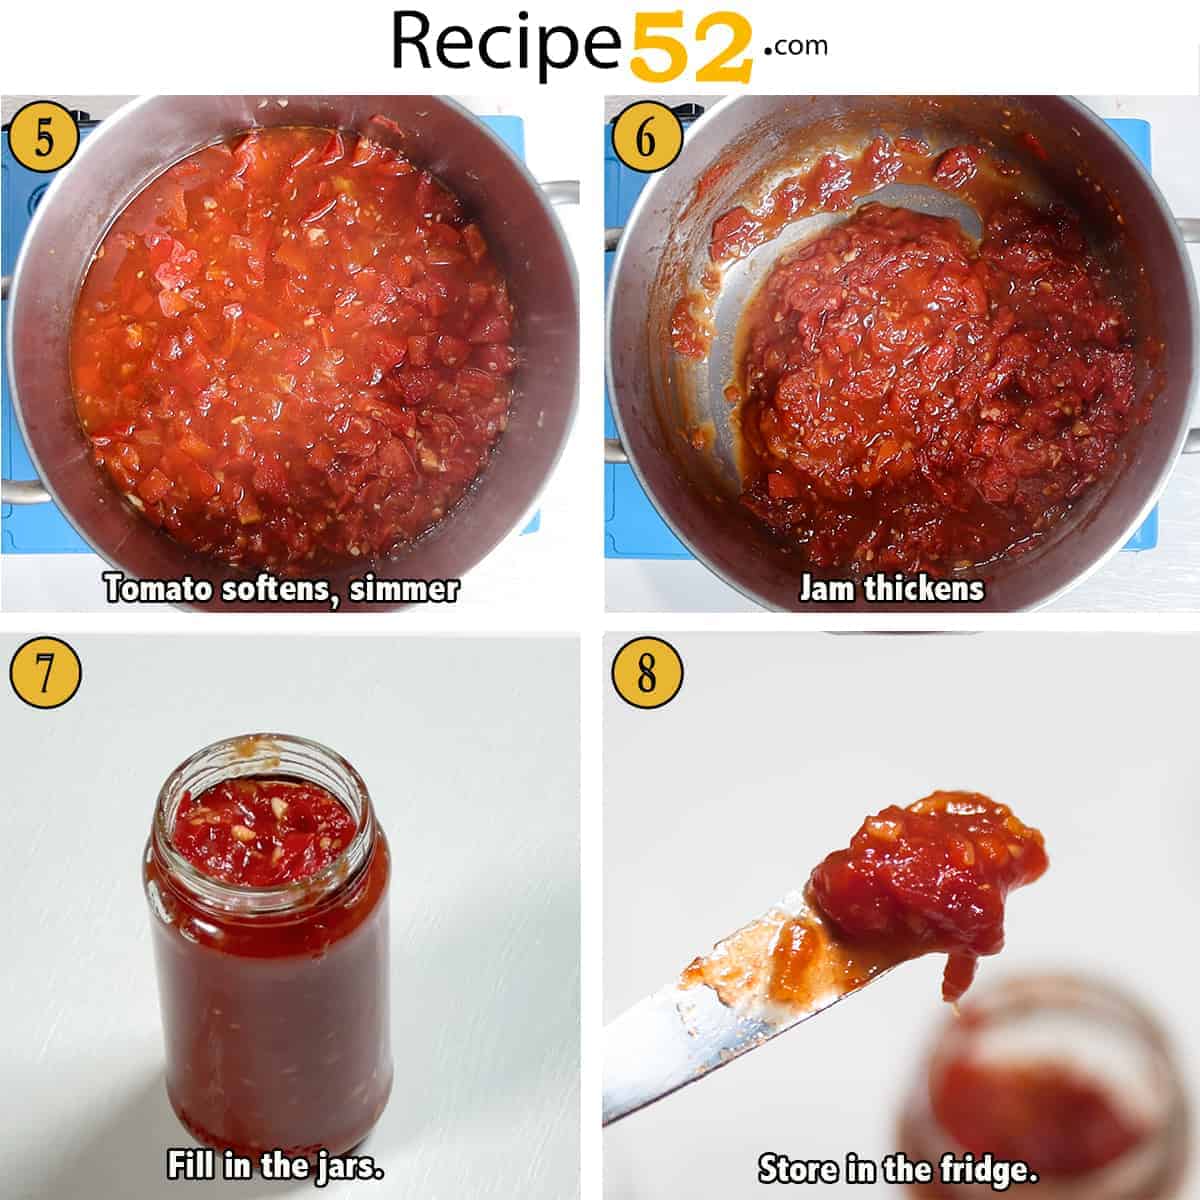 Steps to cook and store jam.